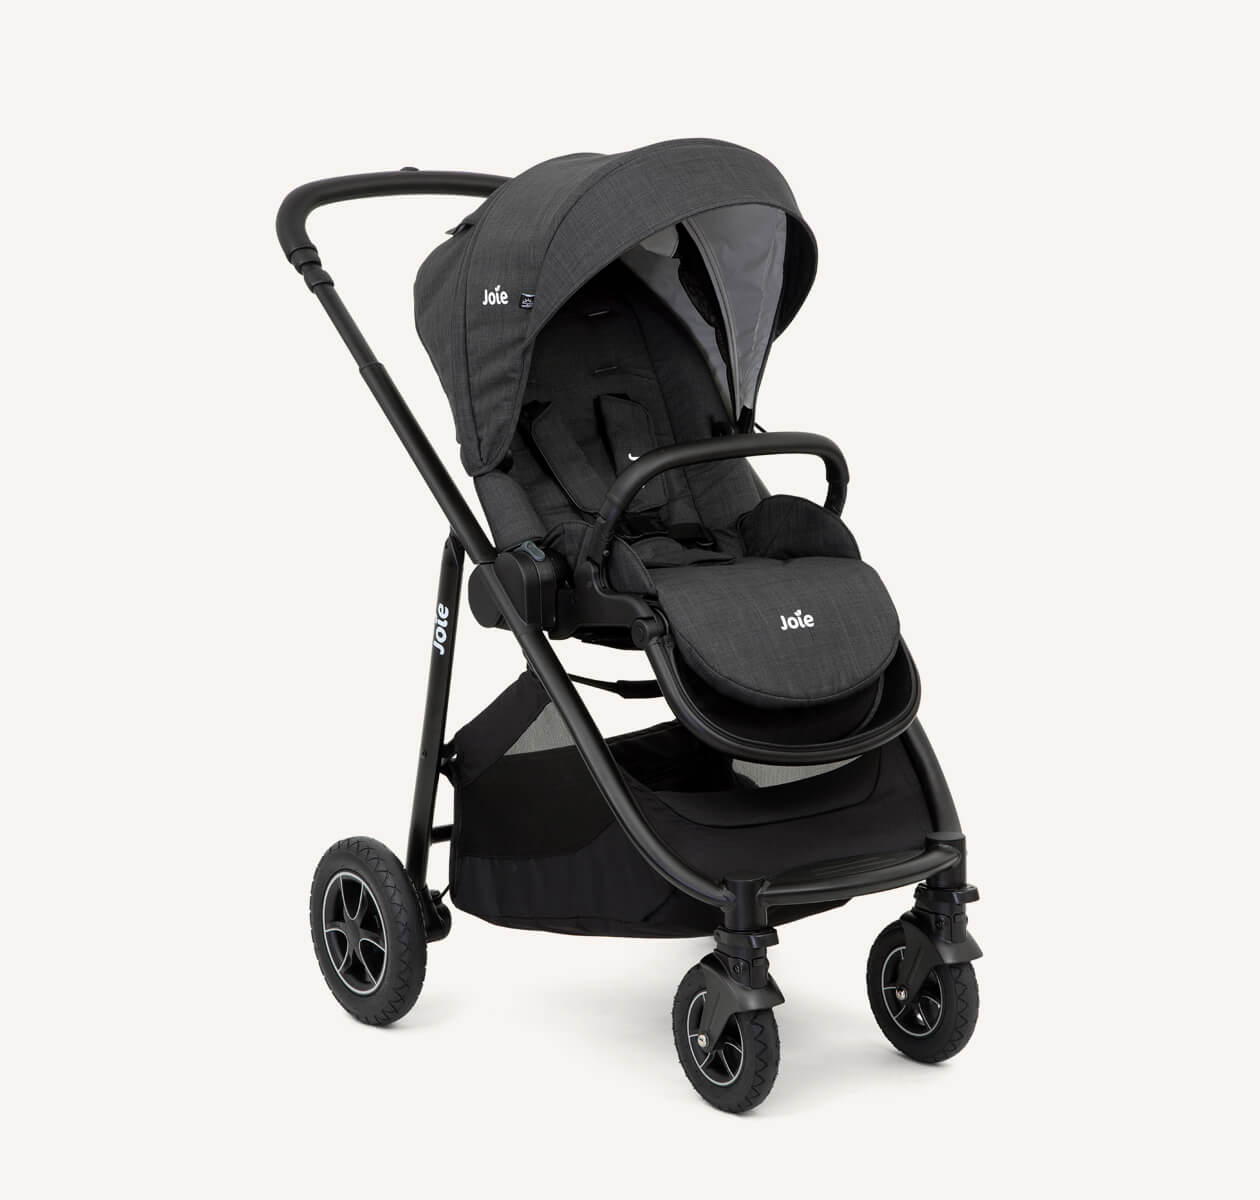 Joie black versatrax pram positioned at a right angle.